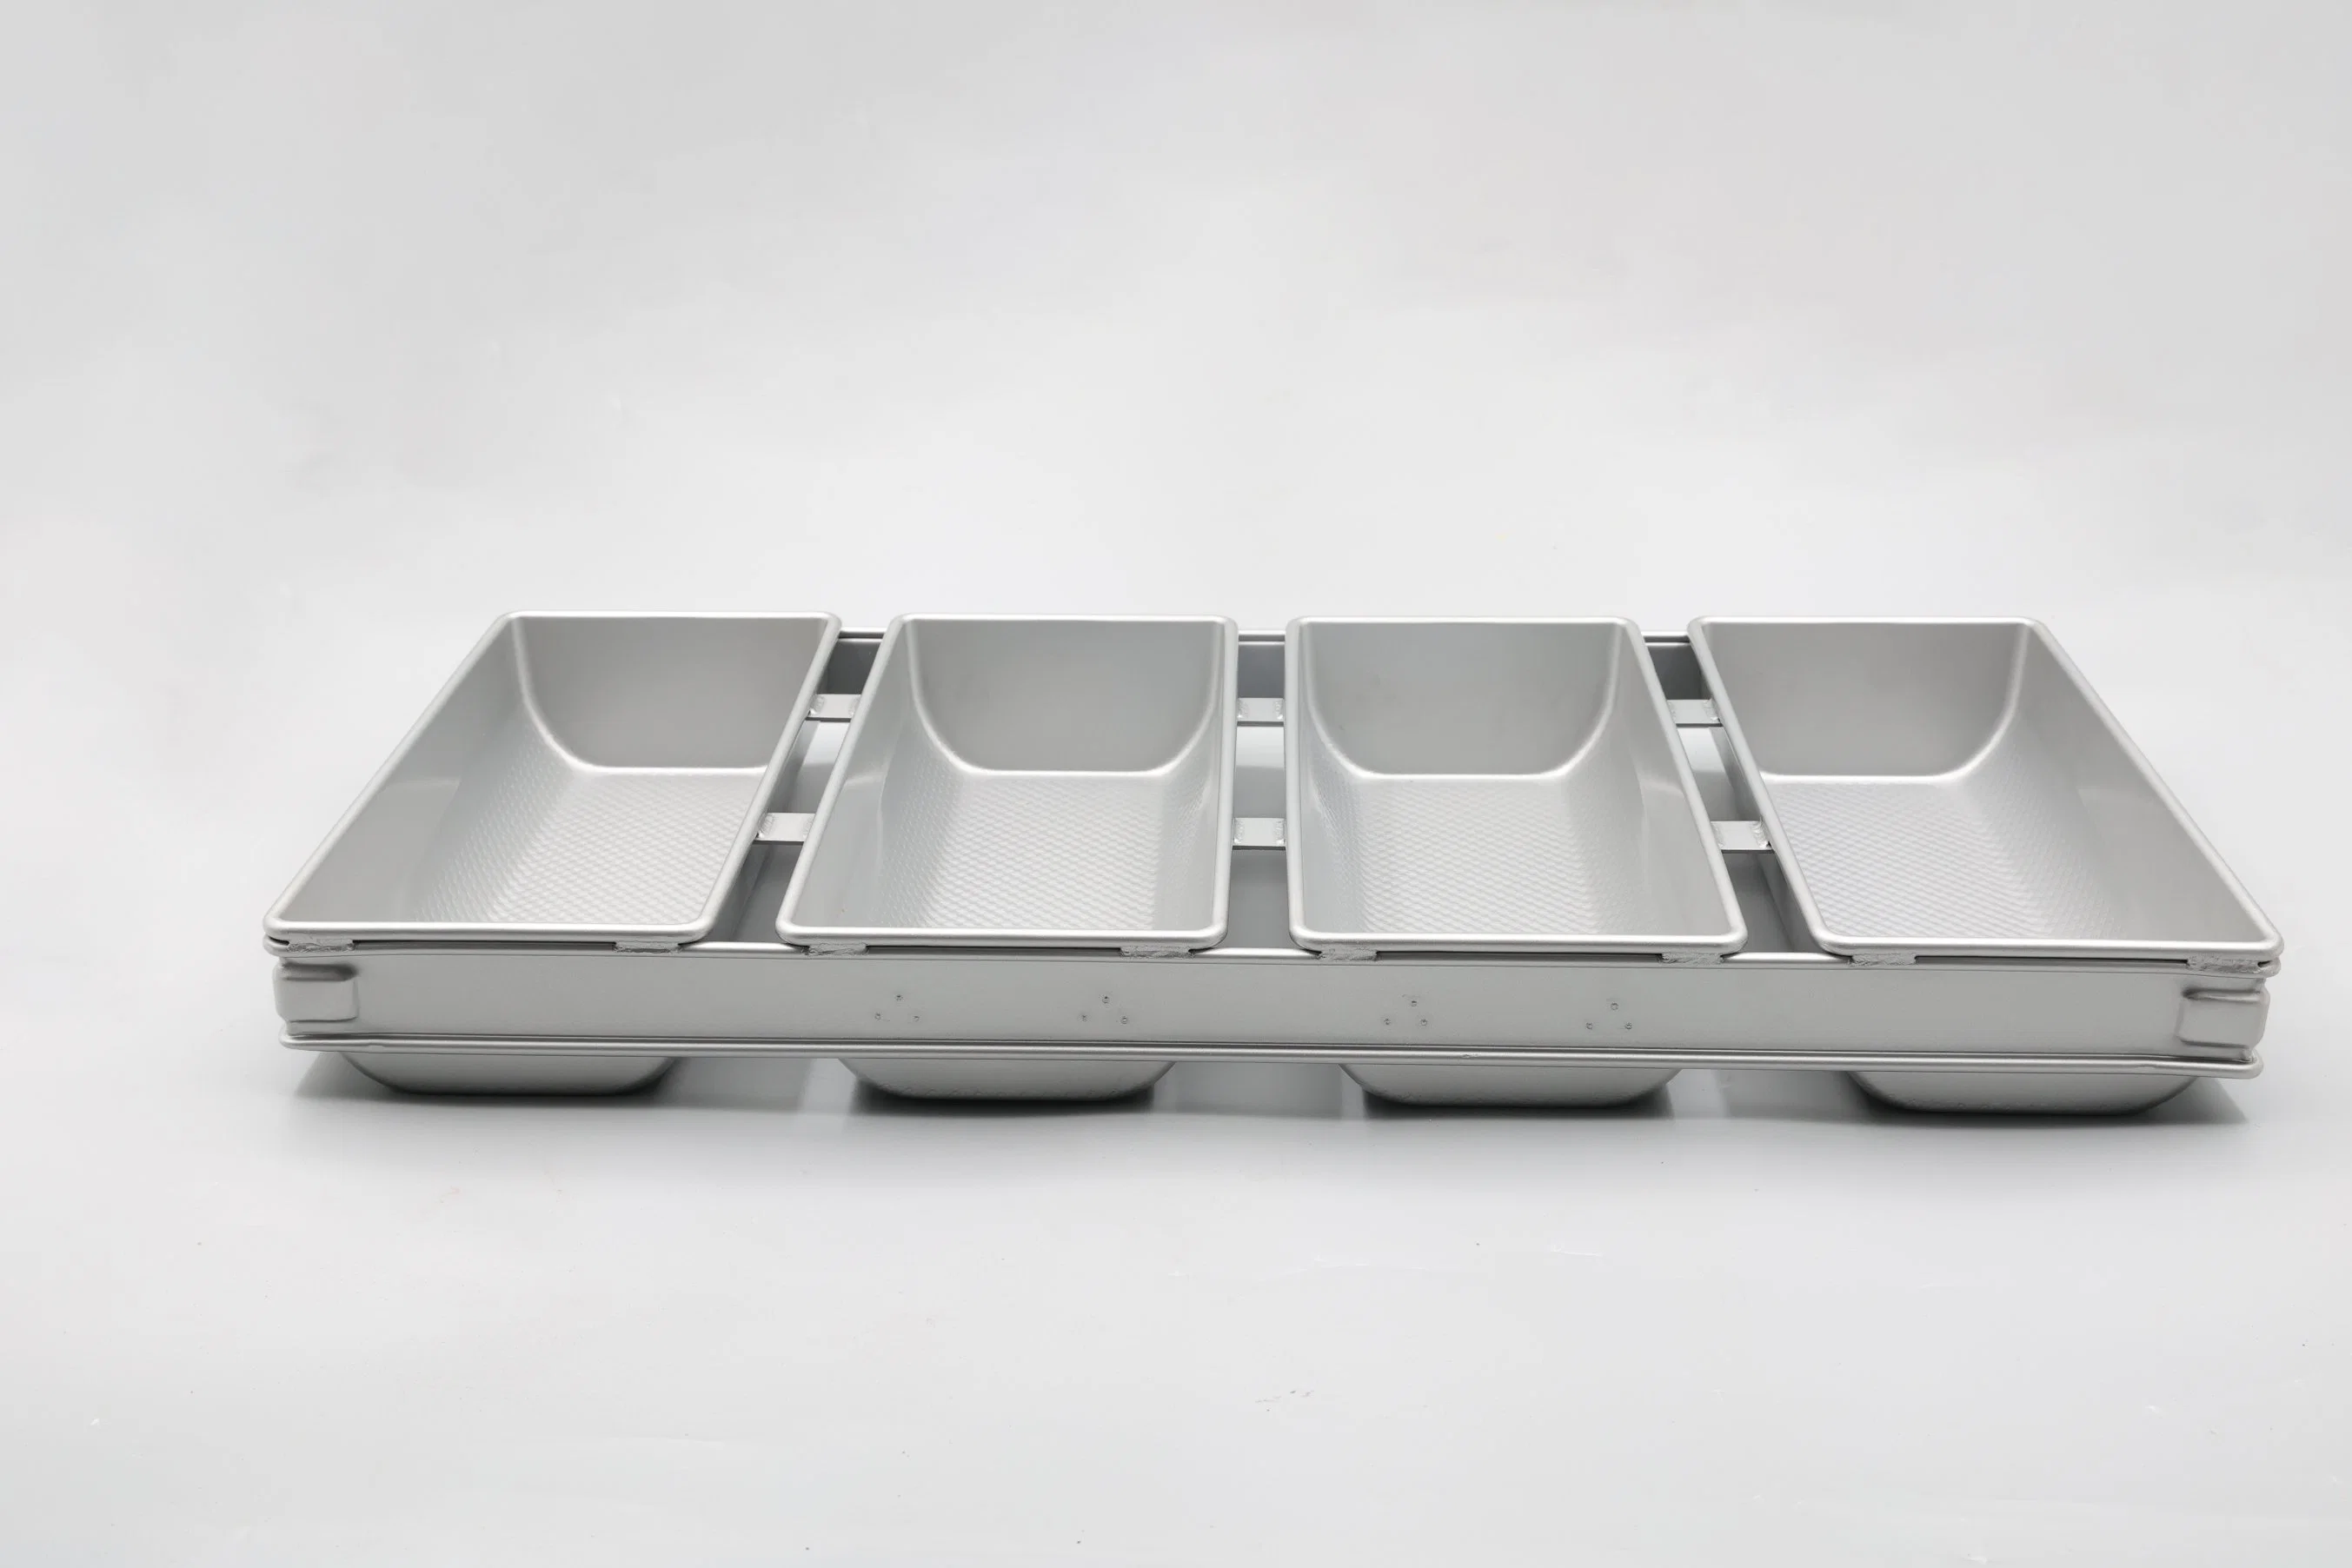 Rk Bakeware China Nonstick Aluminum Stainless Steel Muffin Baking Tray Cake Tray Cupcake Tray Brownie Tray Baguette Tray Burger Bun Tray Hotdog Tray Perforated